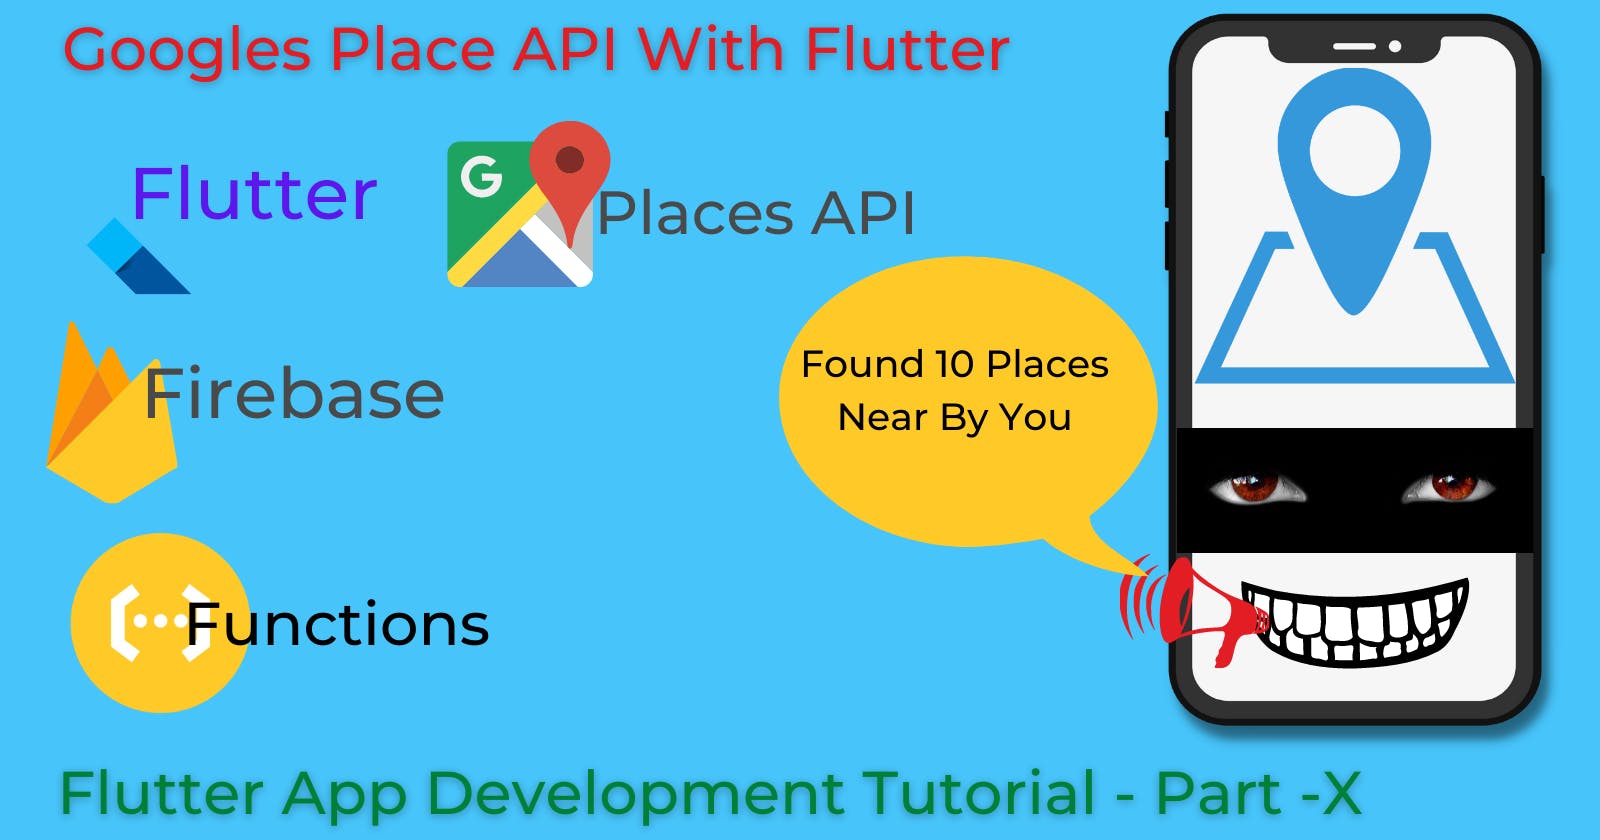 How To Fetch Nearby Places From Google Maps with Flutter?